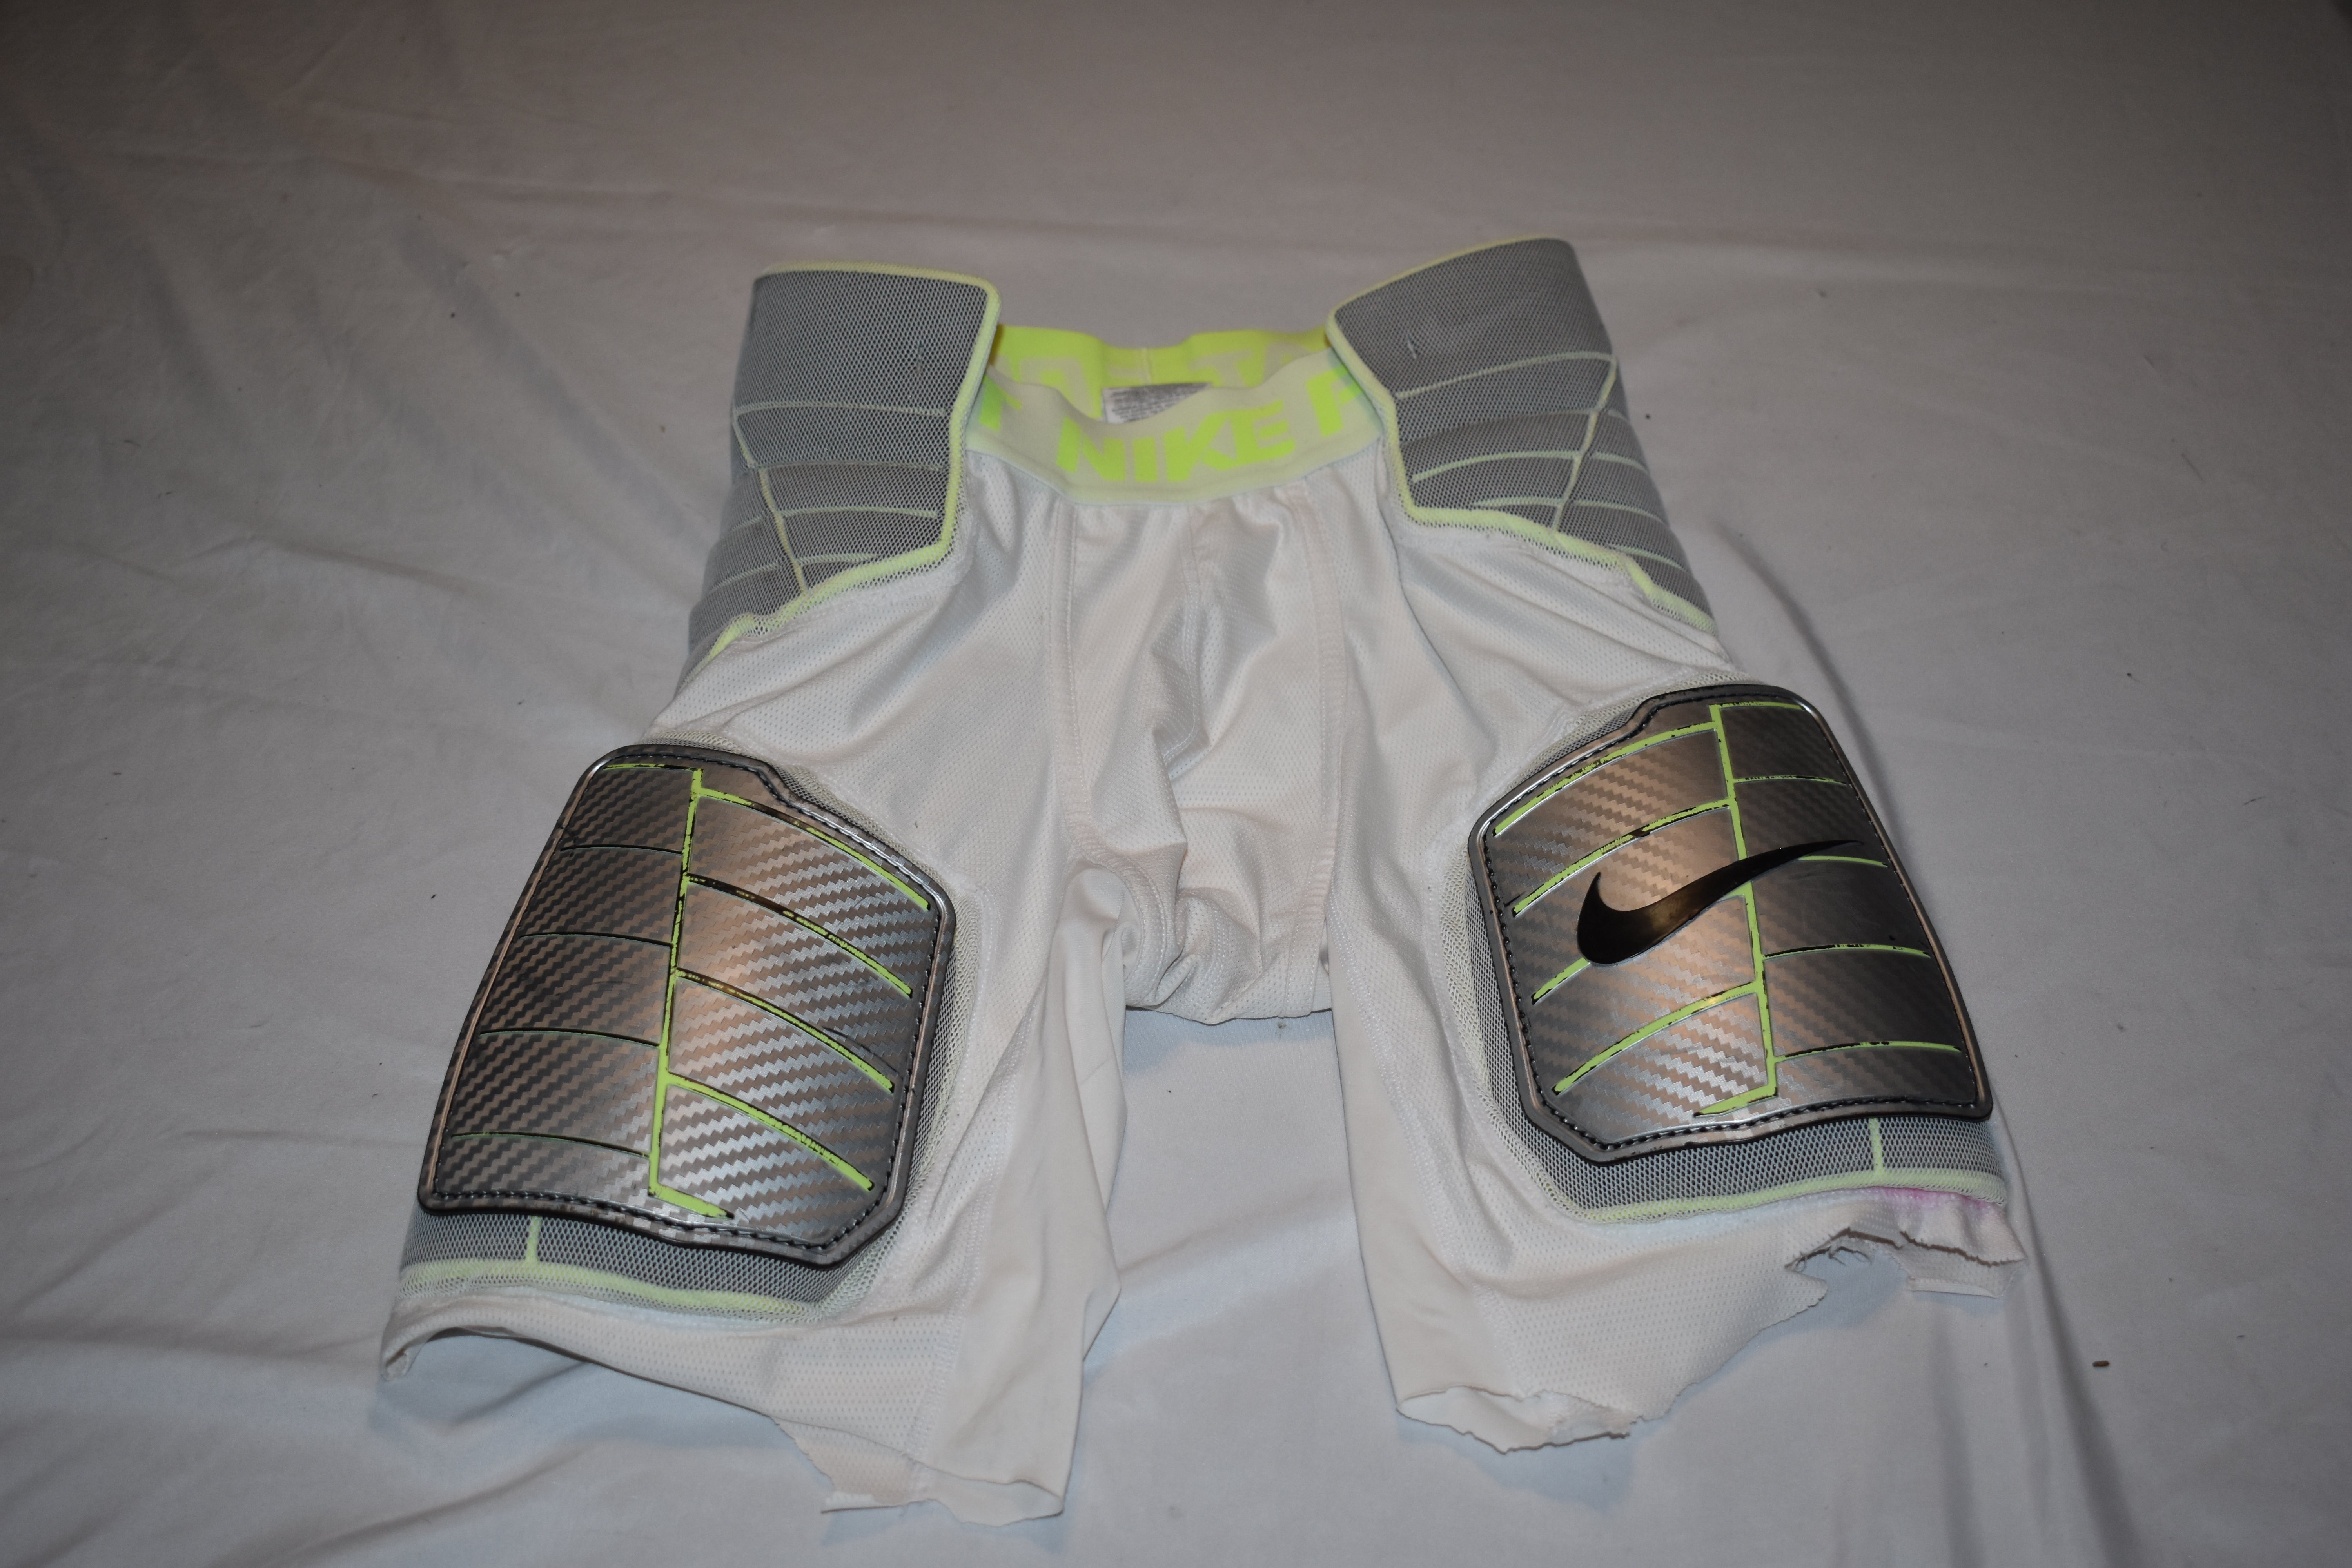 Nike Pro Combat Hyperstrong Football Girdle, White/Silver, Adult